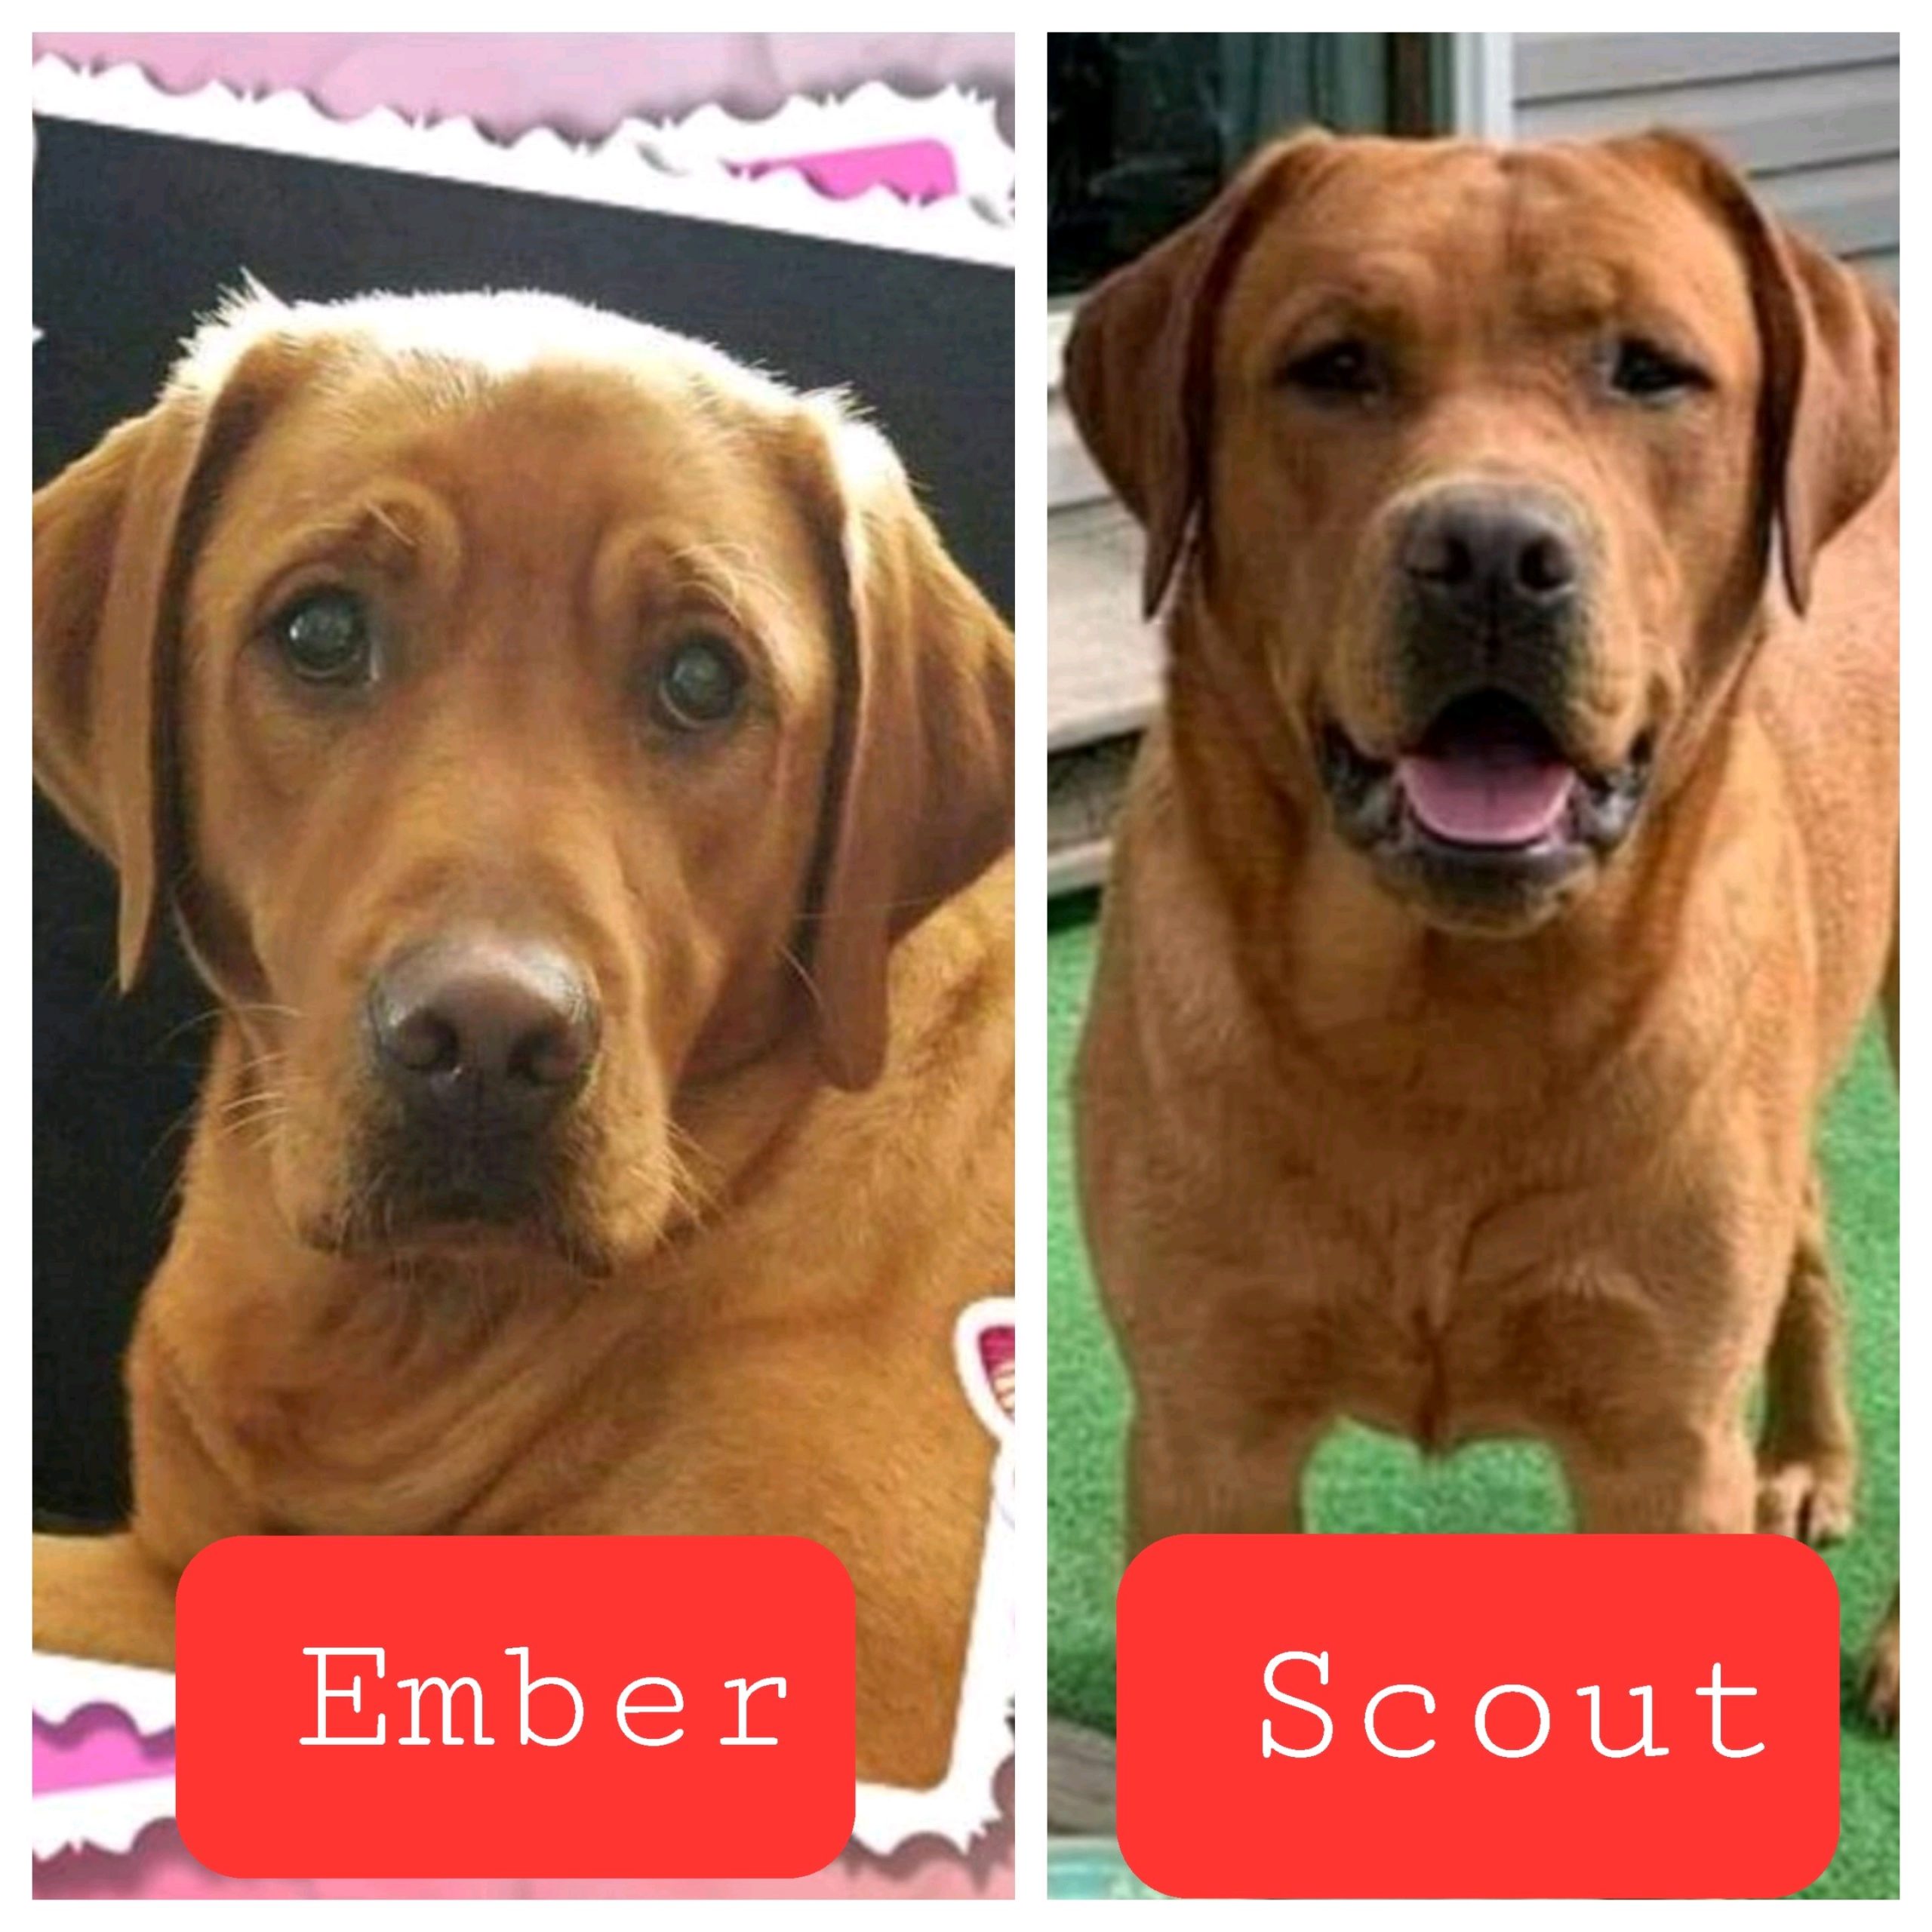 Ember and Scout